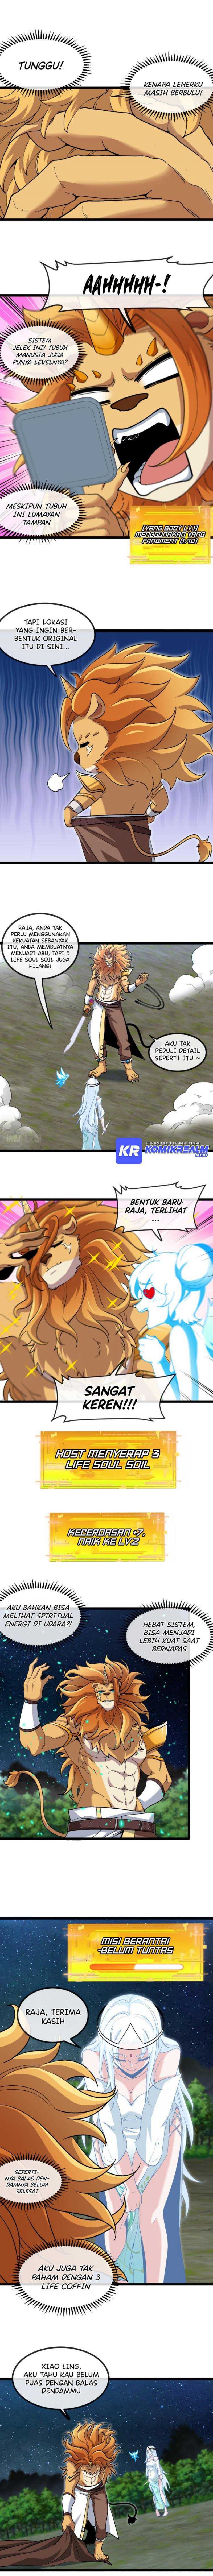 The Golden Lion King  Chapter 05 8